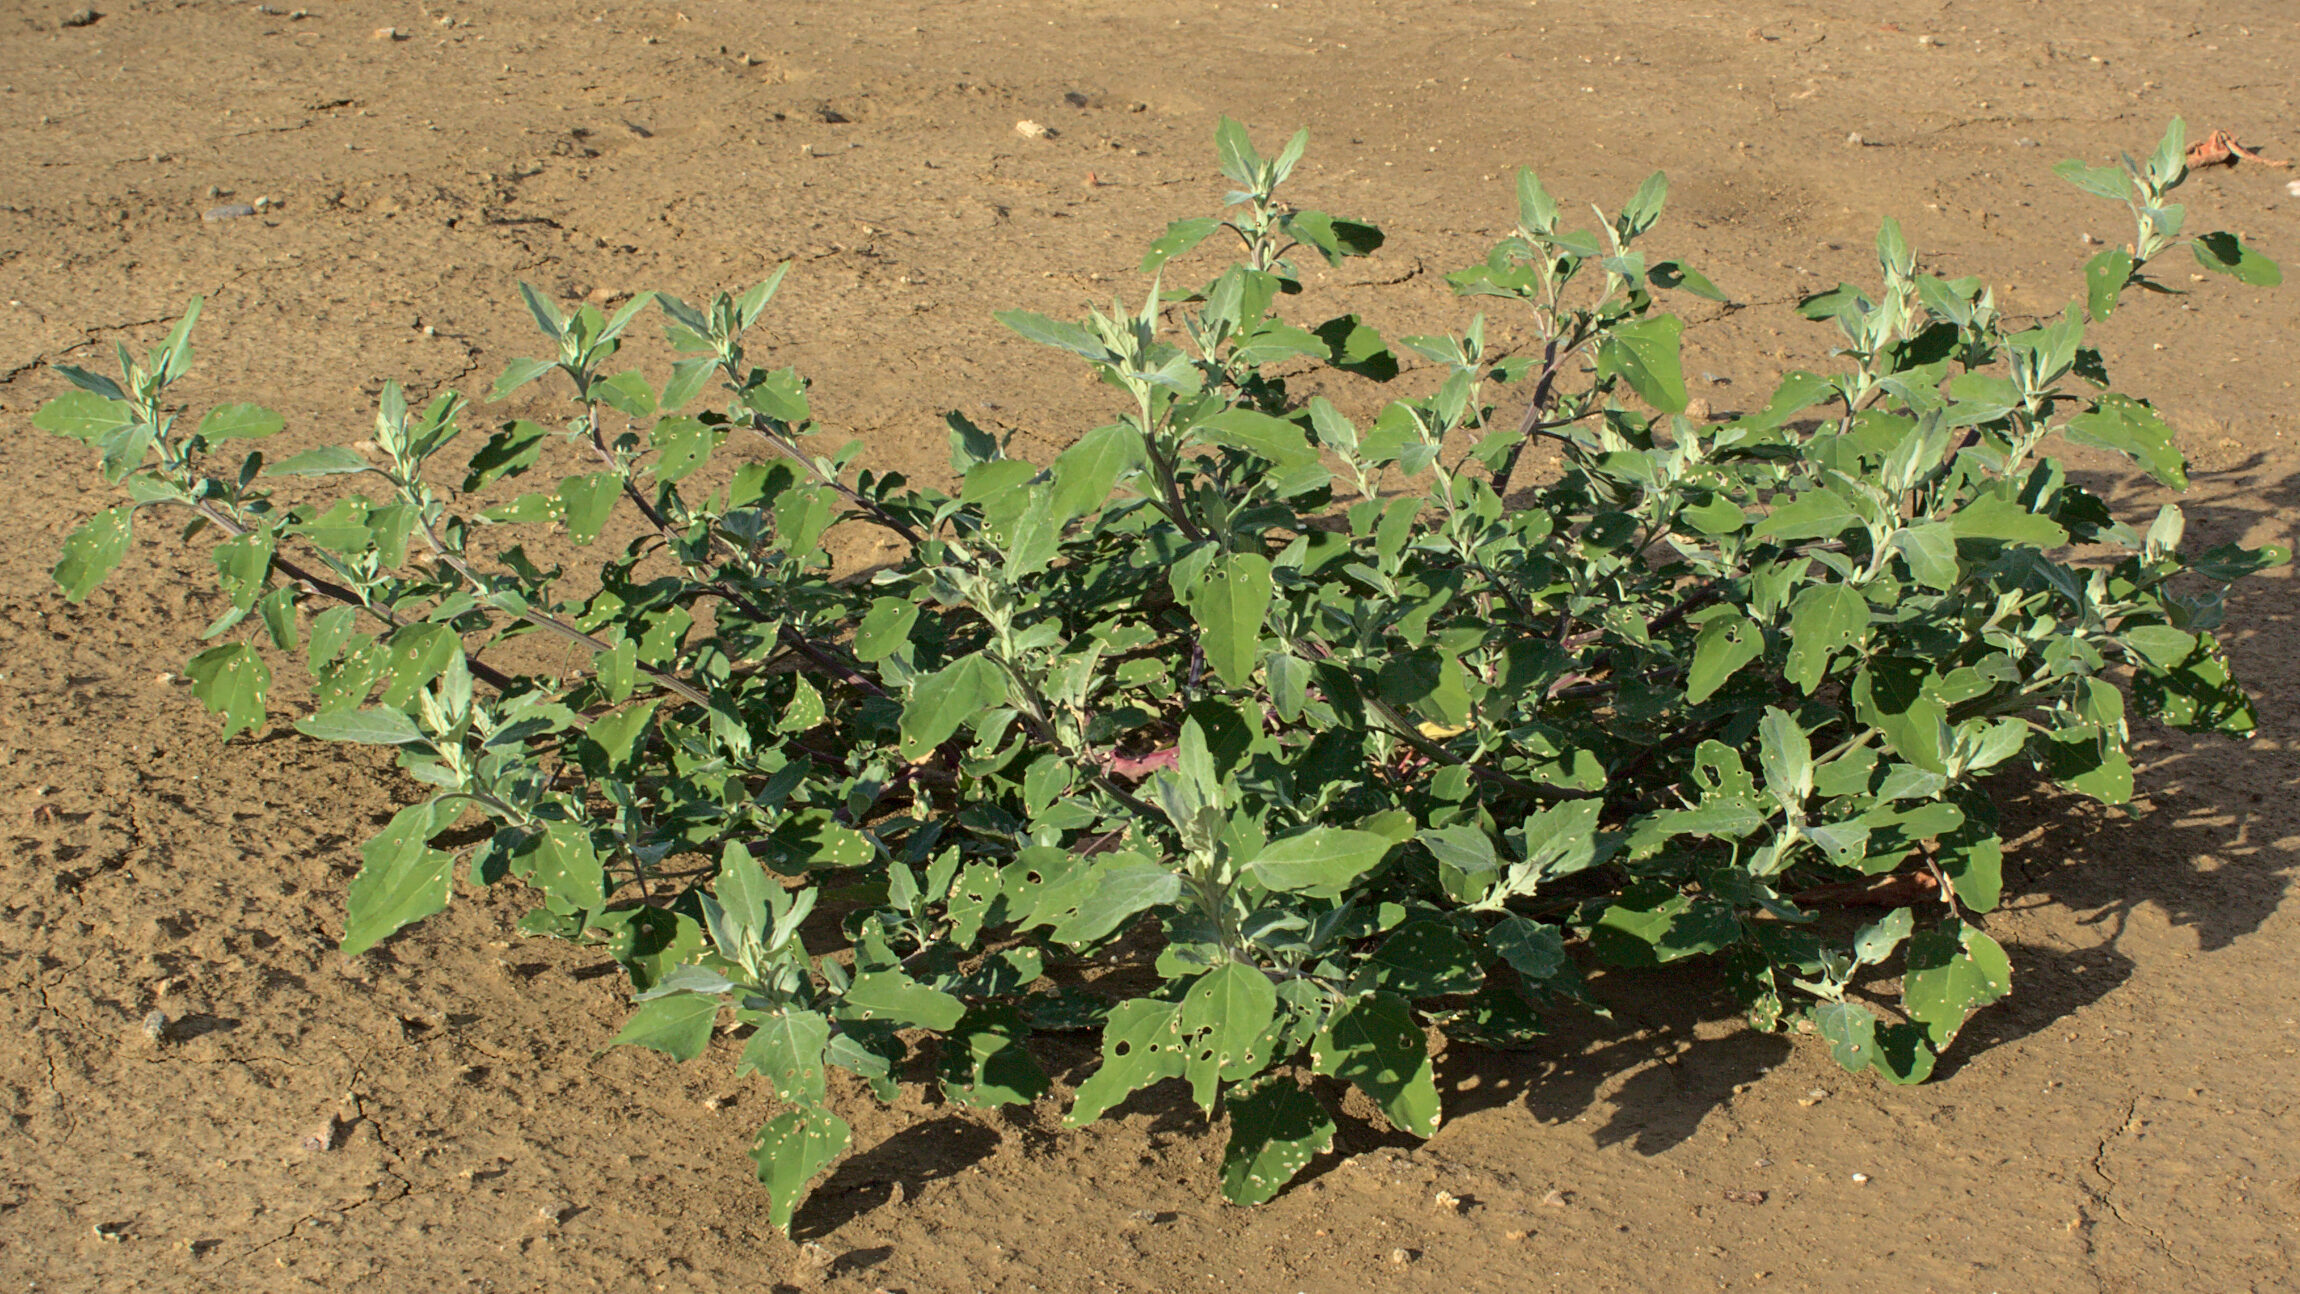 cluster of pigweed aka lambsquarters in a dirt field